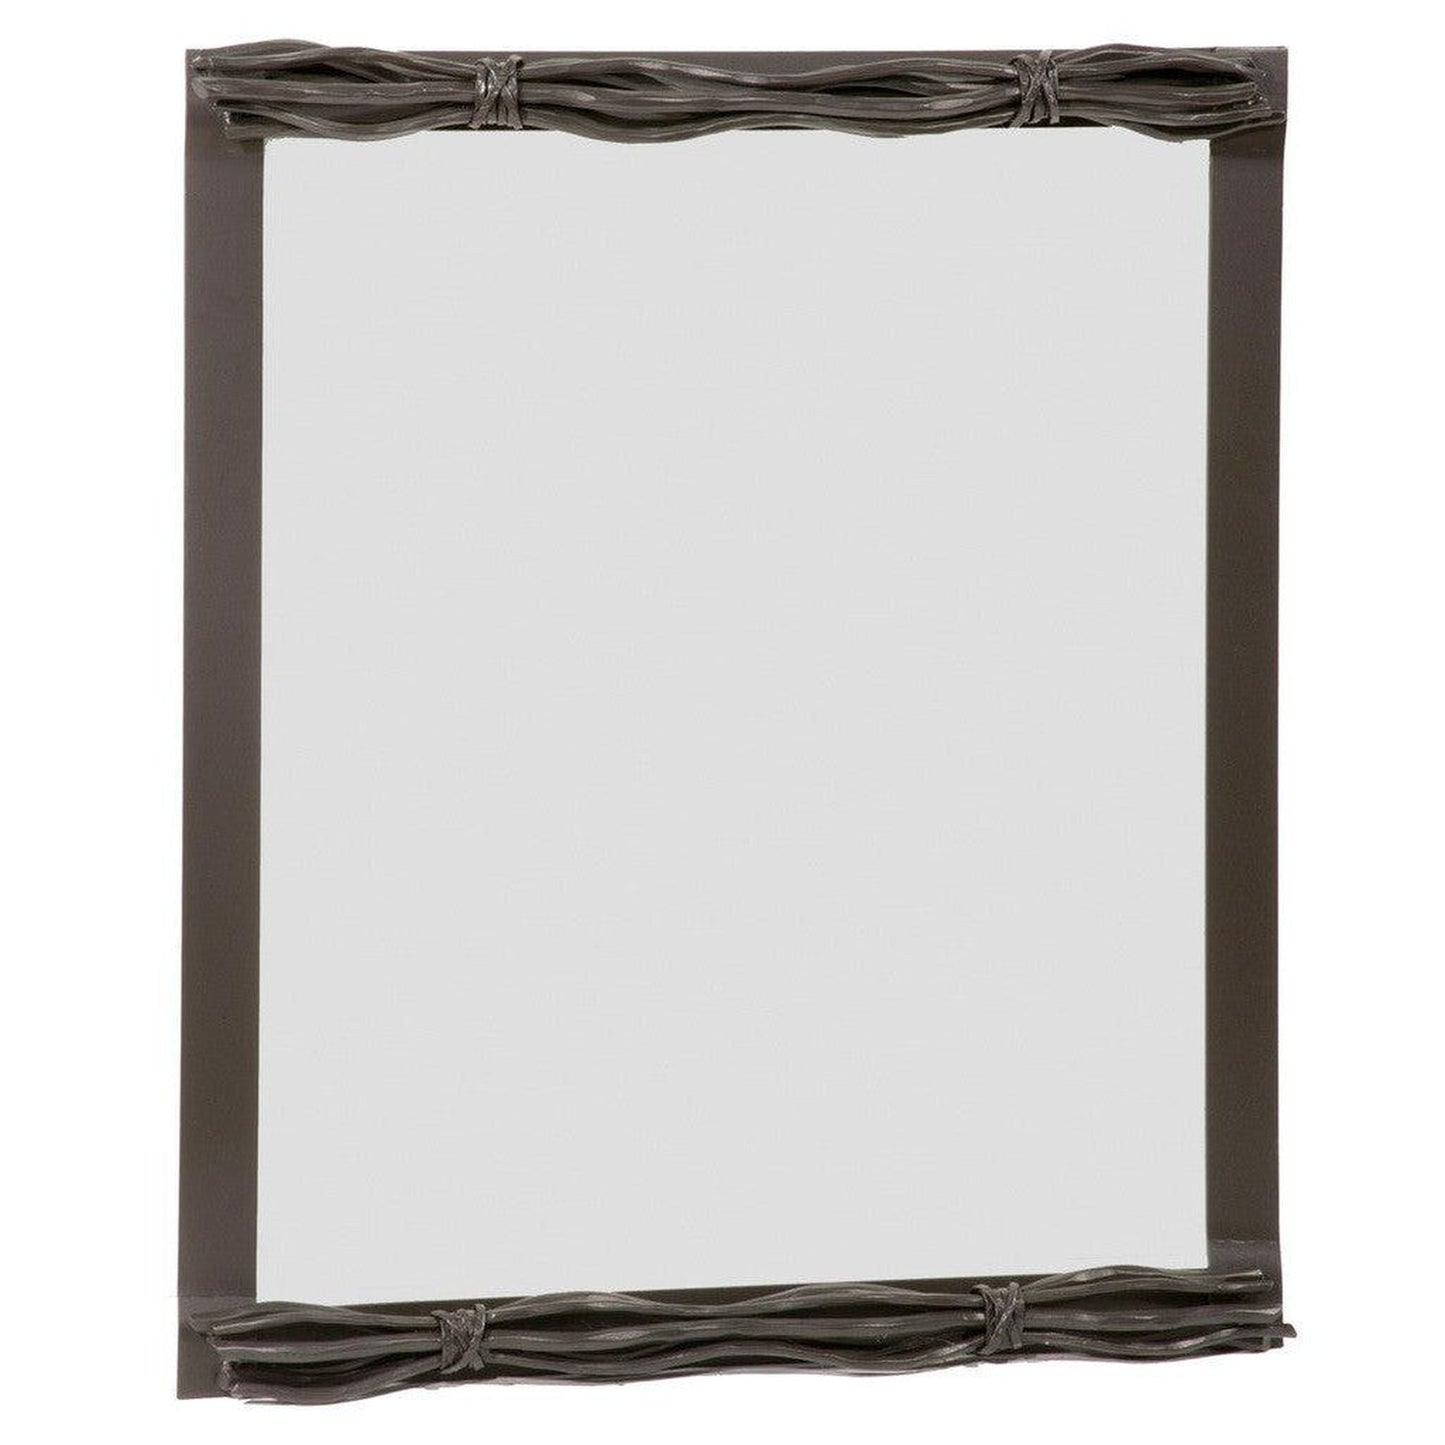 Stone County Ironworks Rush 21" x 26" Small Hand Rubbed Ivory Iron Wall Mirror With Copper Iron Accent